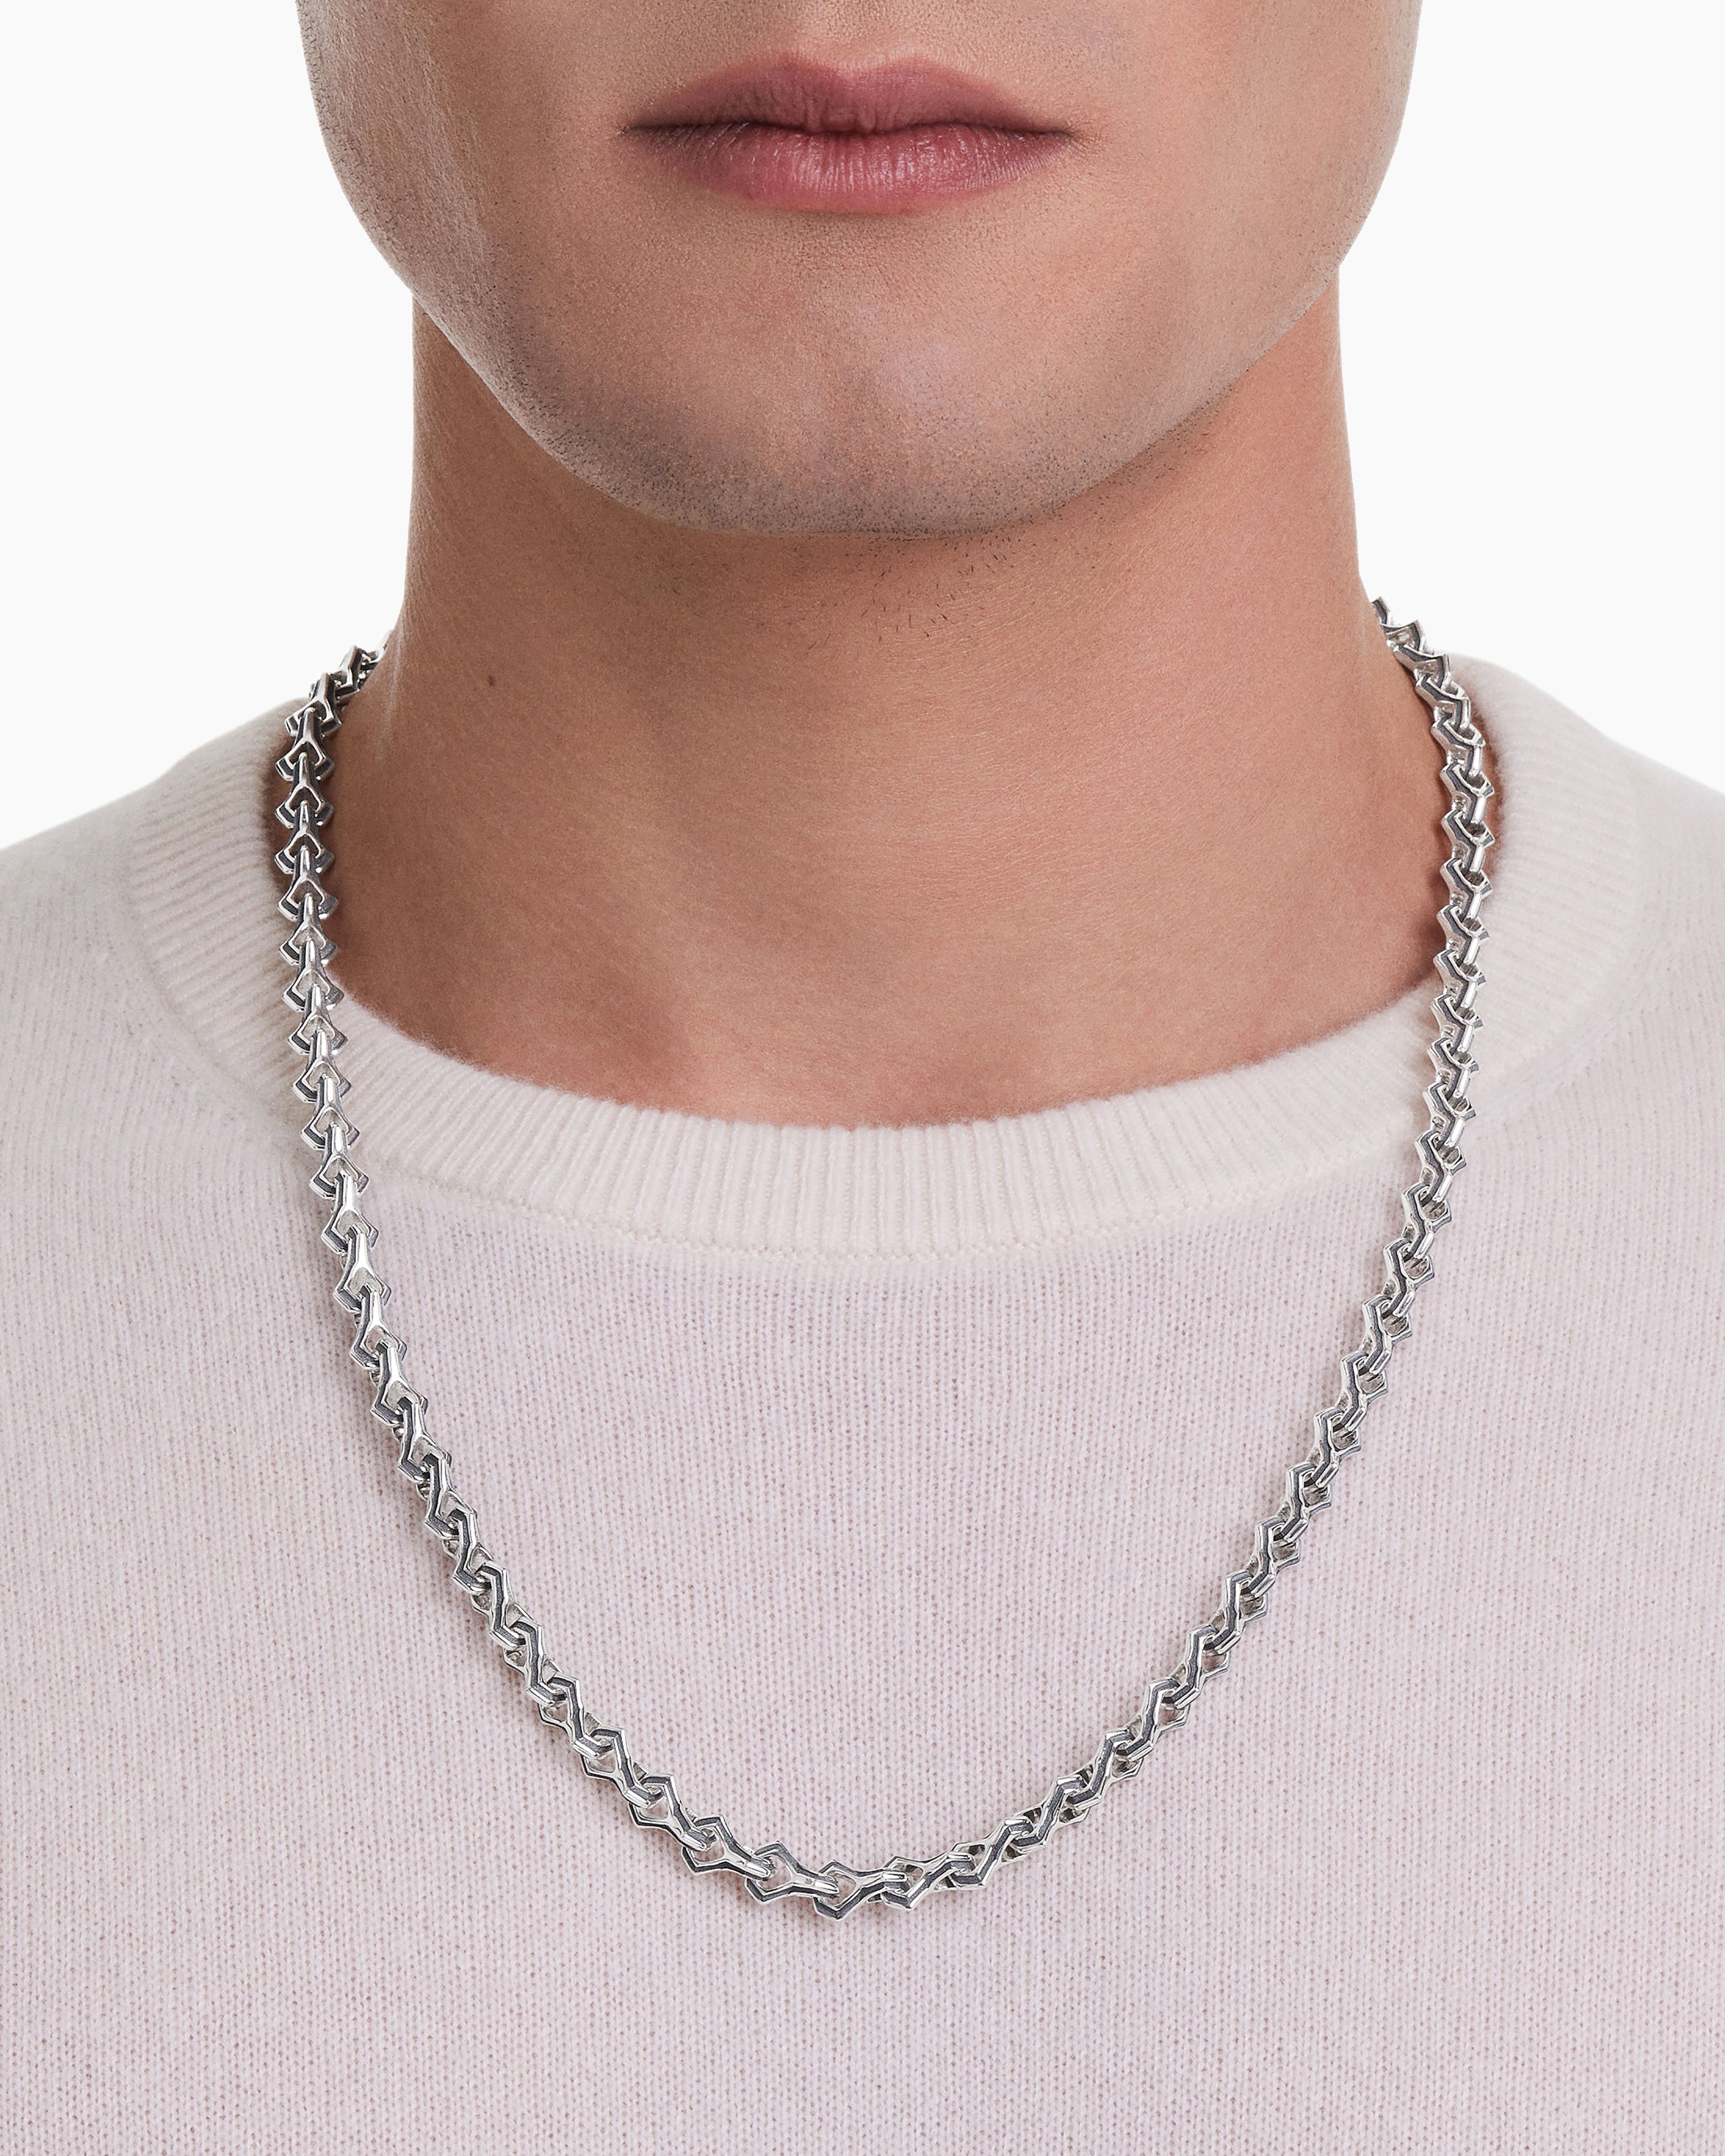 8mm Silver-Tone Chain Necklace, In stock!